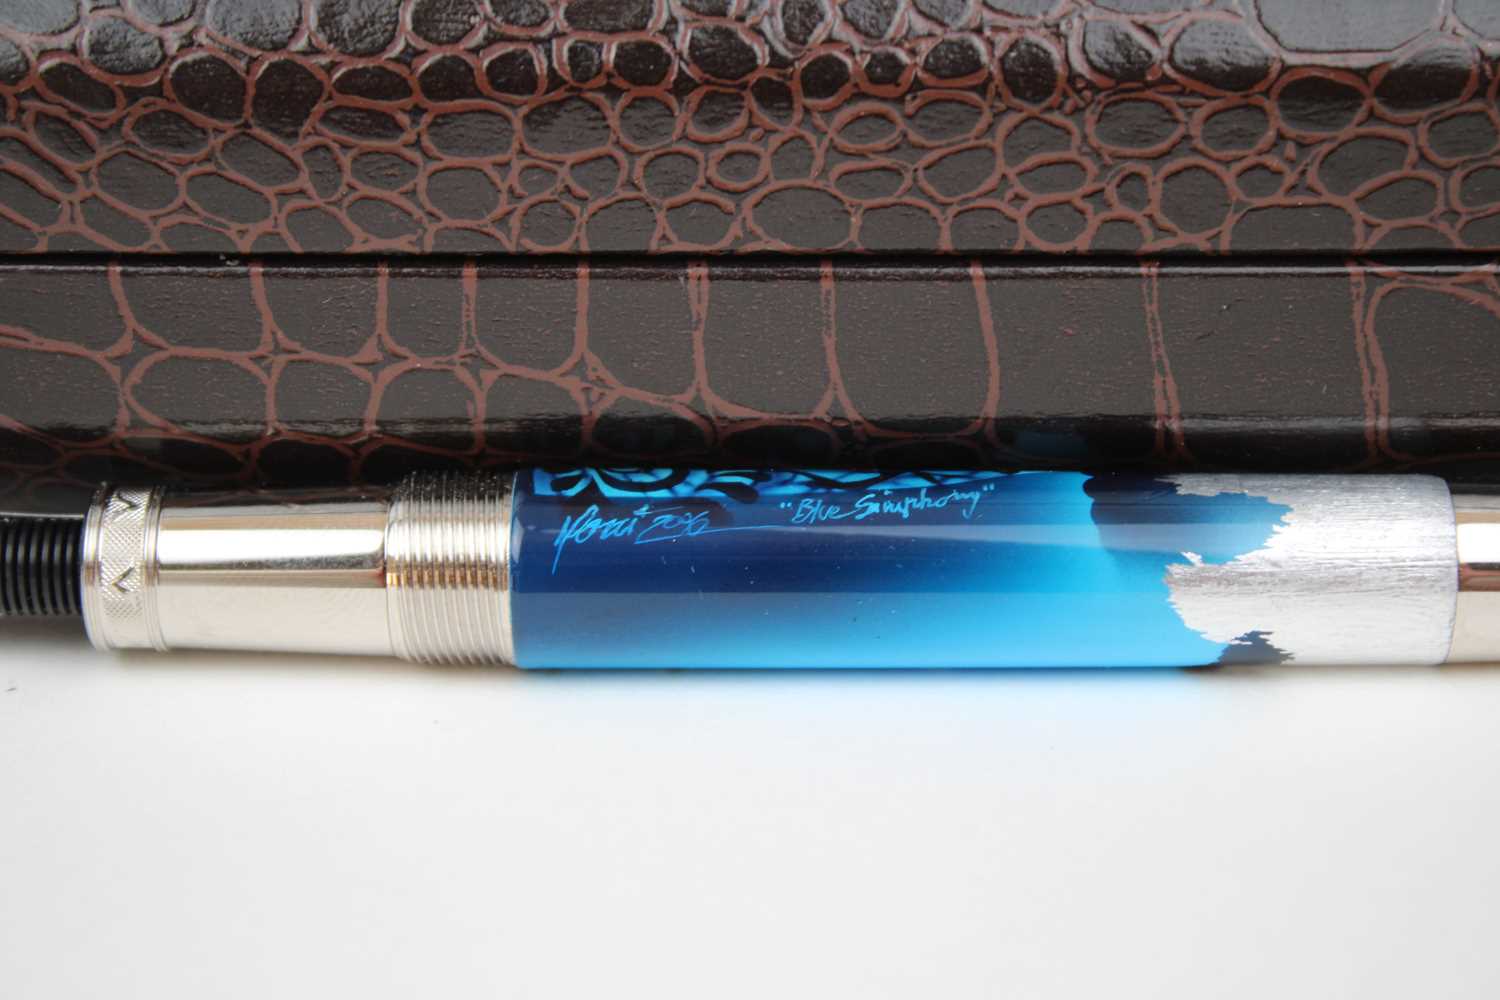 Claudio Mazzi for Visconti, Firenze "Blue Symphony" Limited Edition Fountain Pen - Image 7 of 7